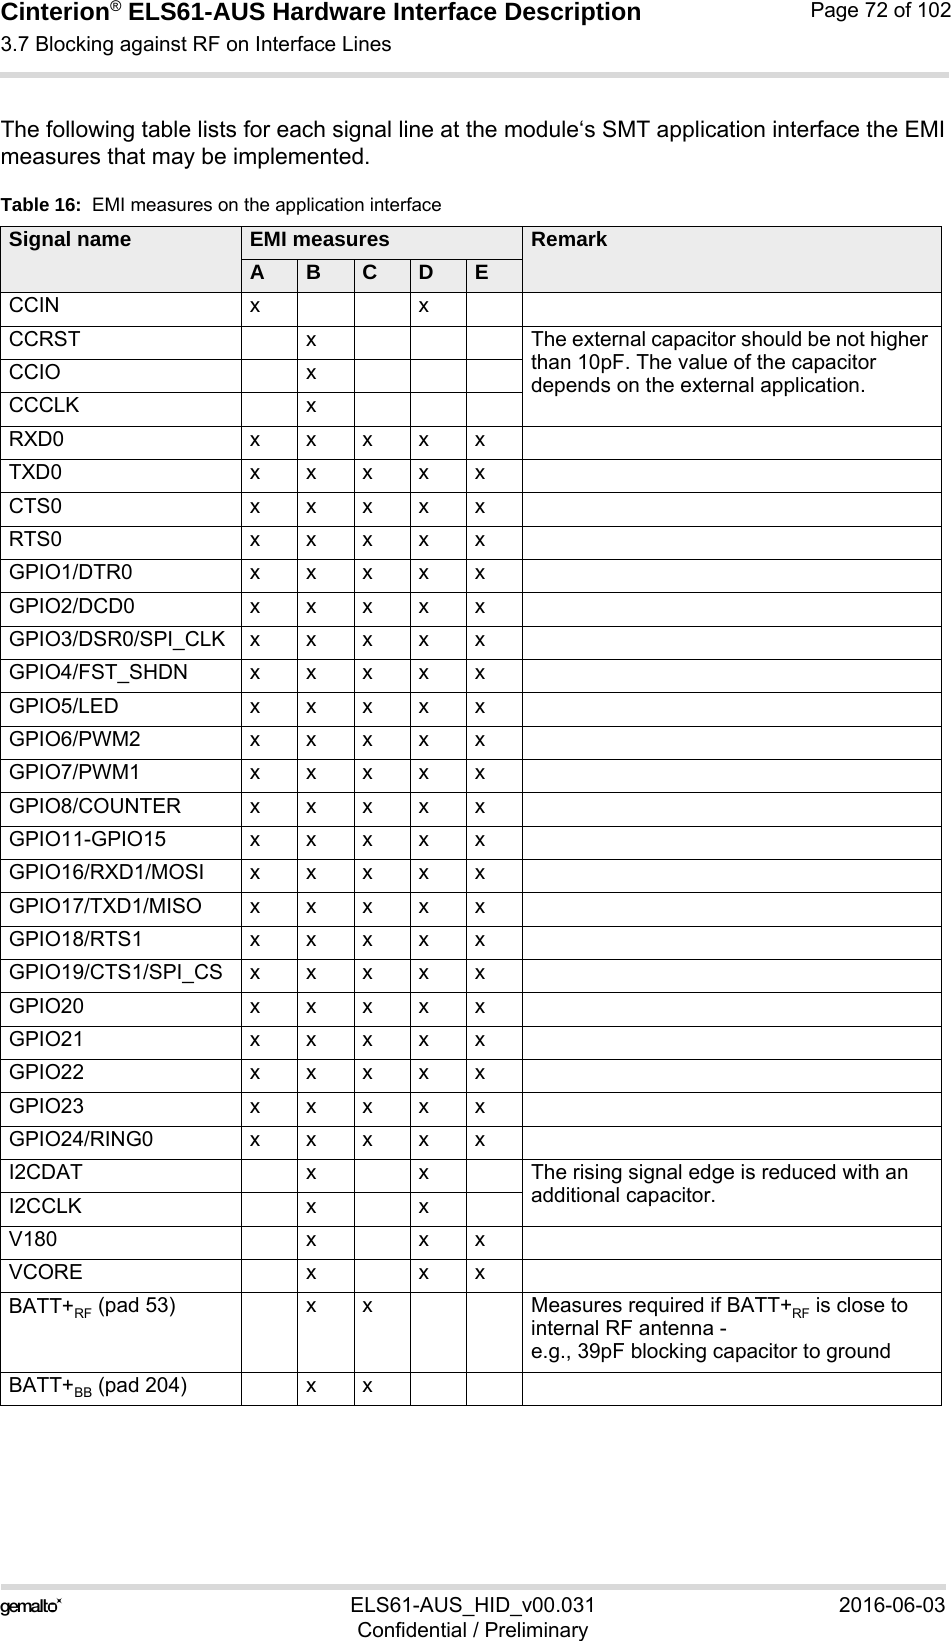 Cinterion® ELS61-AUS Hardware Interface Description3.7 Blocking against RF on Interface Lines73ELS61-AUS_HID_v00.031 2016-06-03Confidential / PreliminaryPage 72 of 102The following table lists for each signal line at the module‘s SMT application interface the EMImeasures that may be implemented.Table 16:  EMI measures on the application interfaceSignal name EMI measures RemarkABCDECCIN x xCCRST x The external capacitor should be not higher than 10pF. The value of the capacitor depends on the external application.CCIO xCCCLK xRXD0 xxxxxTXD0 xxxxxCTS0 xxxxxRTS0 xxxxxGPIO1/DTR0 xxxxxGPIO2/DCD0 xxxxxGPIO3/DSR0/SPI_CLKxxxxxGPIO4/FST_SHDN xxxxxGPIO5/LED xxxxxGPIO6/PWM2 xxxxxGPIO7/PWM1 xxxxxGPIO8/COUNTER xxxxxGPIO11-GPIO15 xxxxxGPIO16/RXD1/MOSIxxxxxGPIO17/TXD1/MISOxxxxxGPIO18/RTS1 xxxxxGPIO19/CTS1/SPI_CSxxxxxGPIO20 xxxxxGPIO21 xxxxxGPIO22 xxxxxGPIO23 xxxxxGPIO24/RING0 xxxxxI2CDAT  x x The rising signal edge is reduced with an additional capacitor.I2CCLK x xV180 x x xVCORE x x xBATT+RF (pad 53) x x Measures required if BATT+RF is close to internal RF antenna -e.g., 39pF blocking capacitor to groundBATT+BB (pad 204) x x